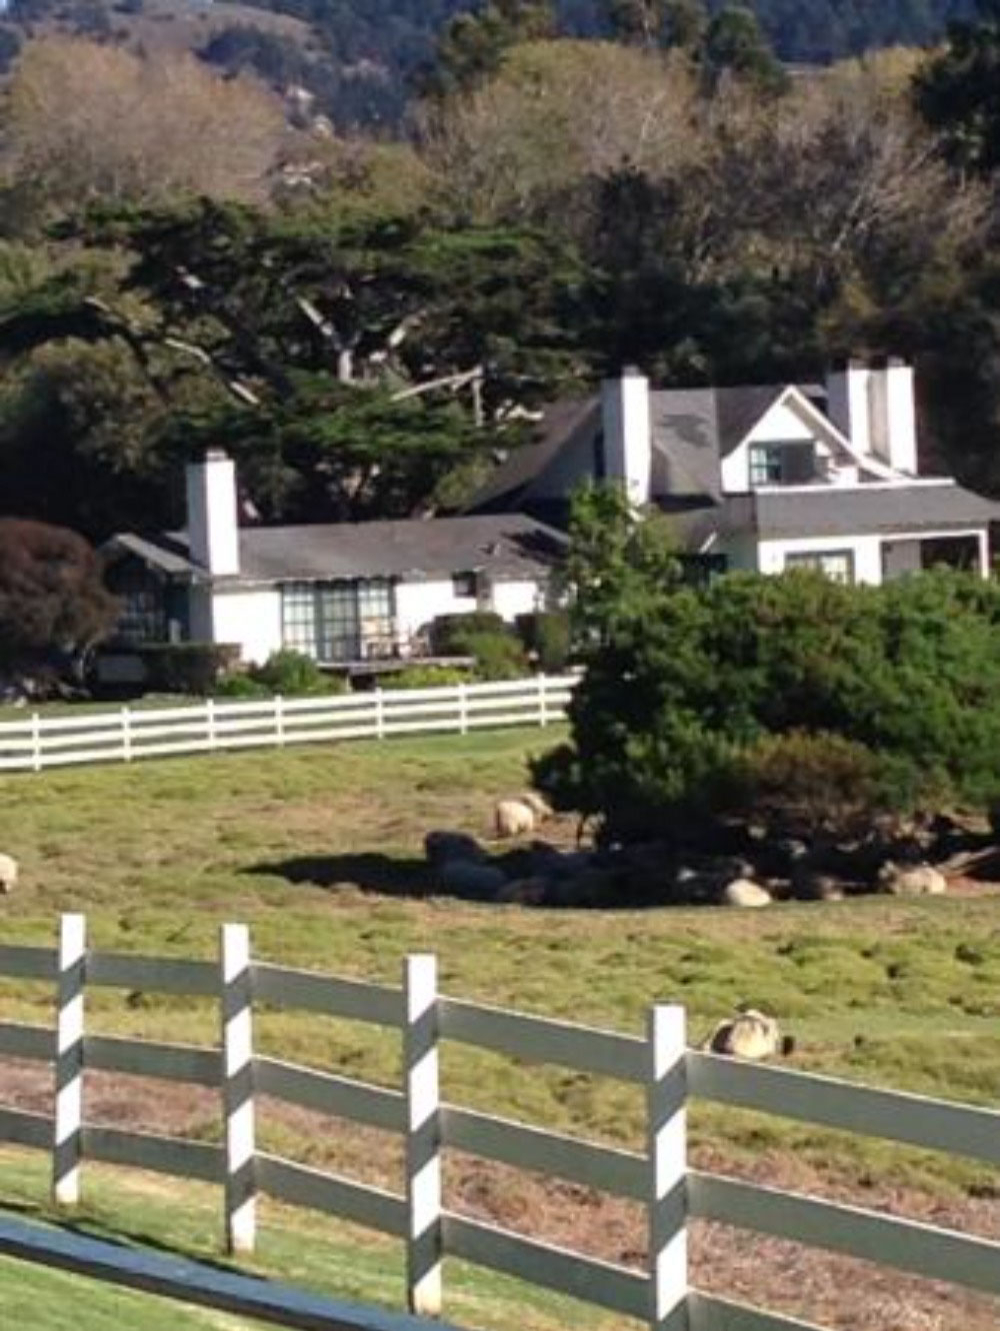 Clint Eastwood Historic Mission Ranch in Carmel Beach